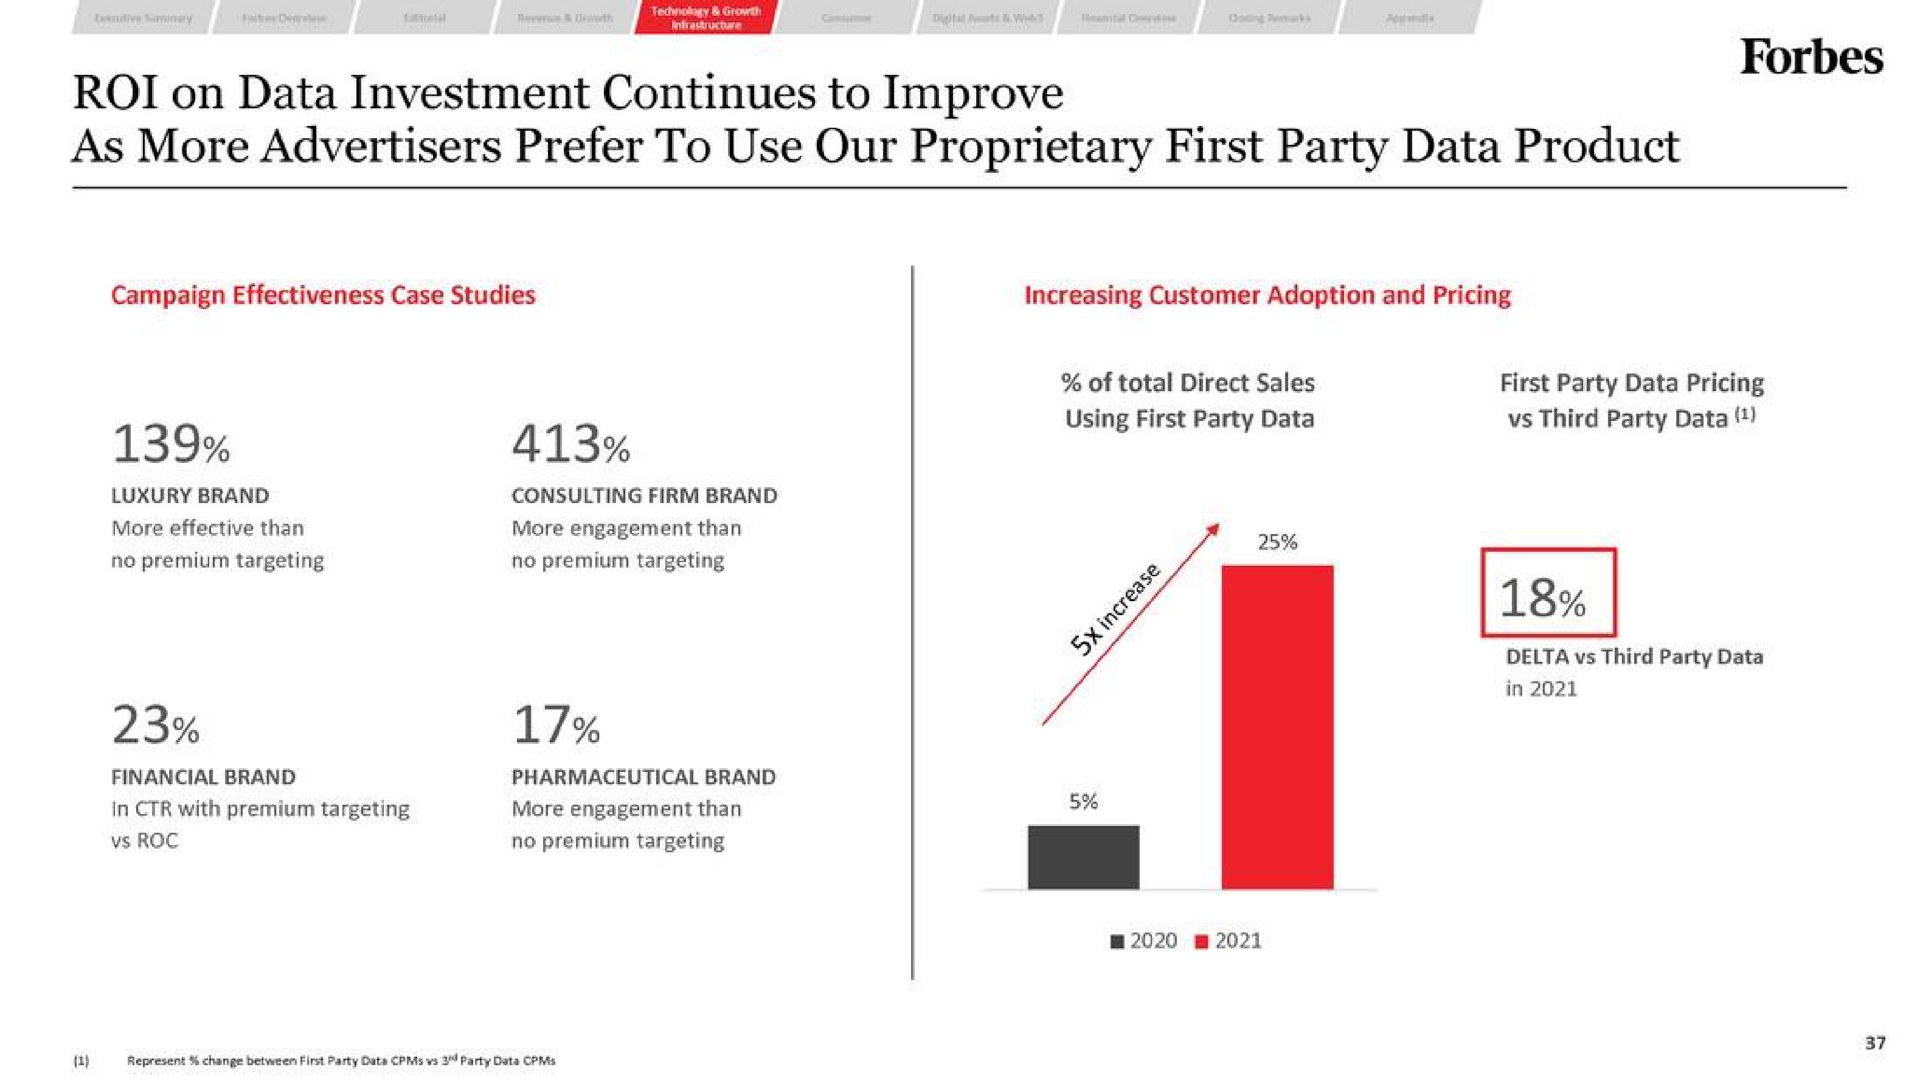 roi on data investment continues to improve as more advertisers prefer to use our proprietary first party data product | Forbes